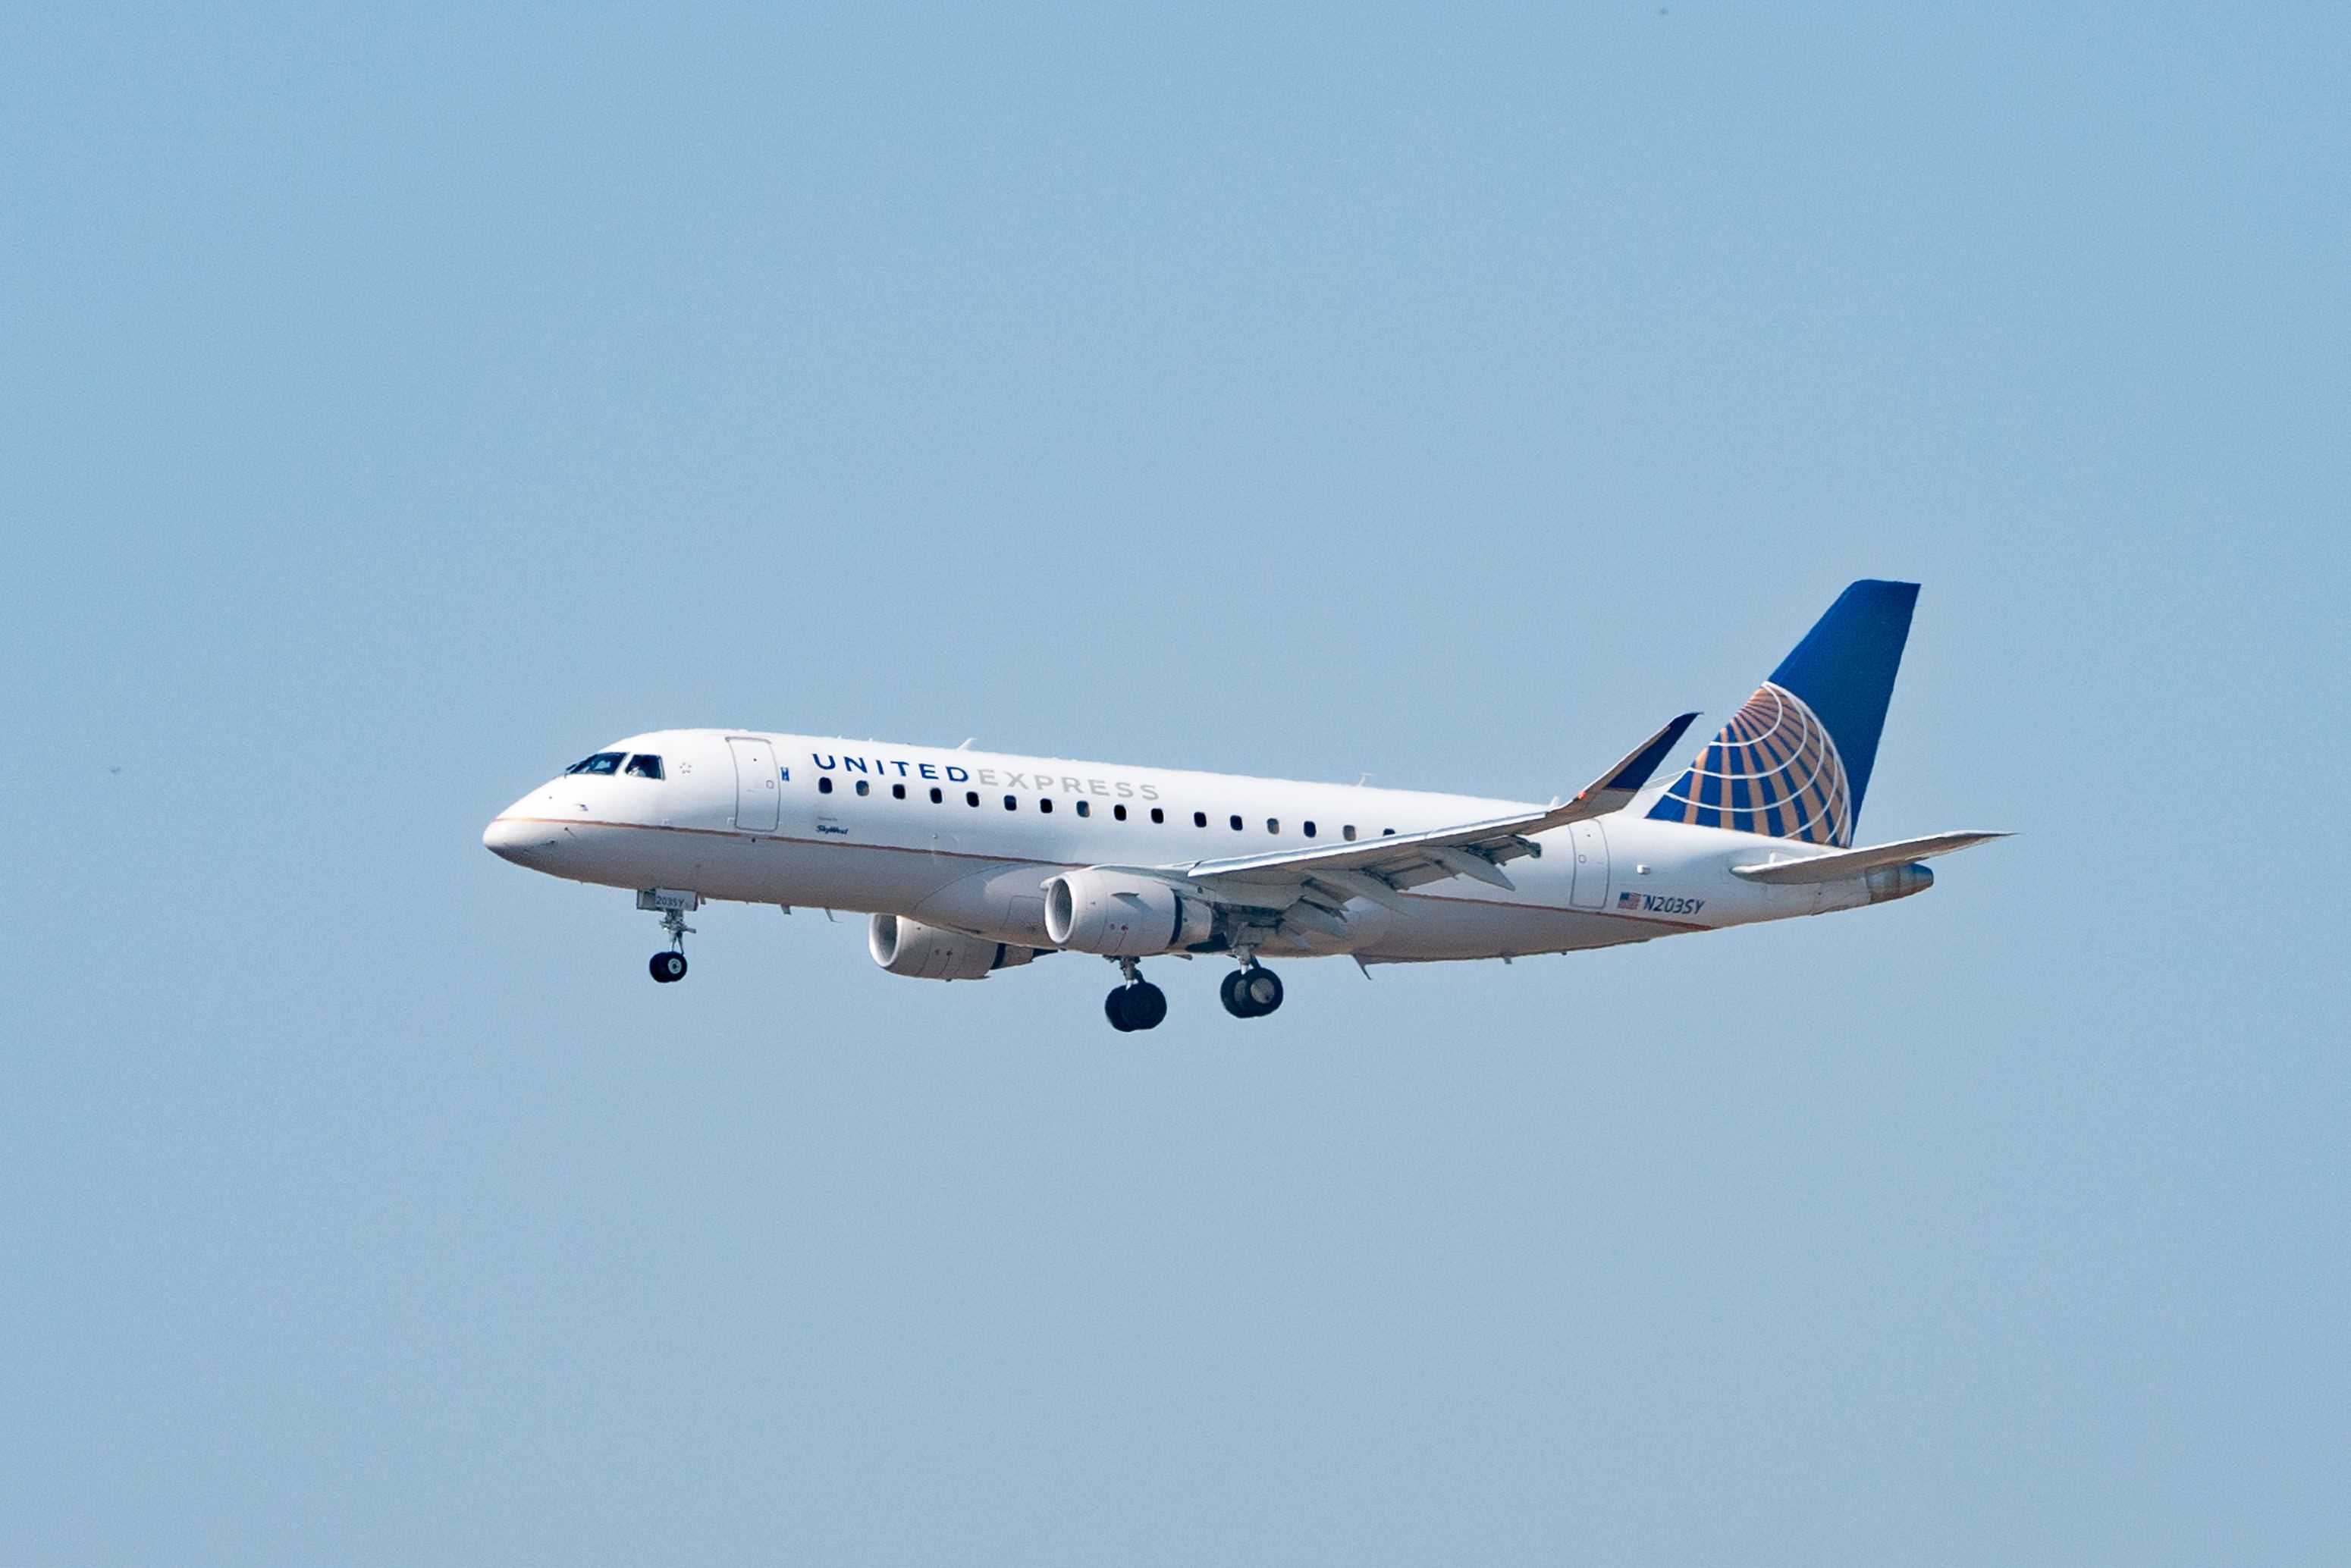 United Express Embraer E170 Lands at LAX